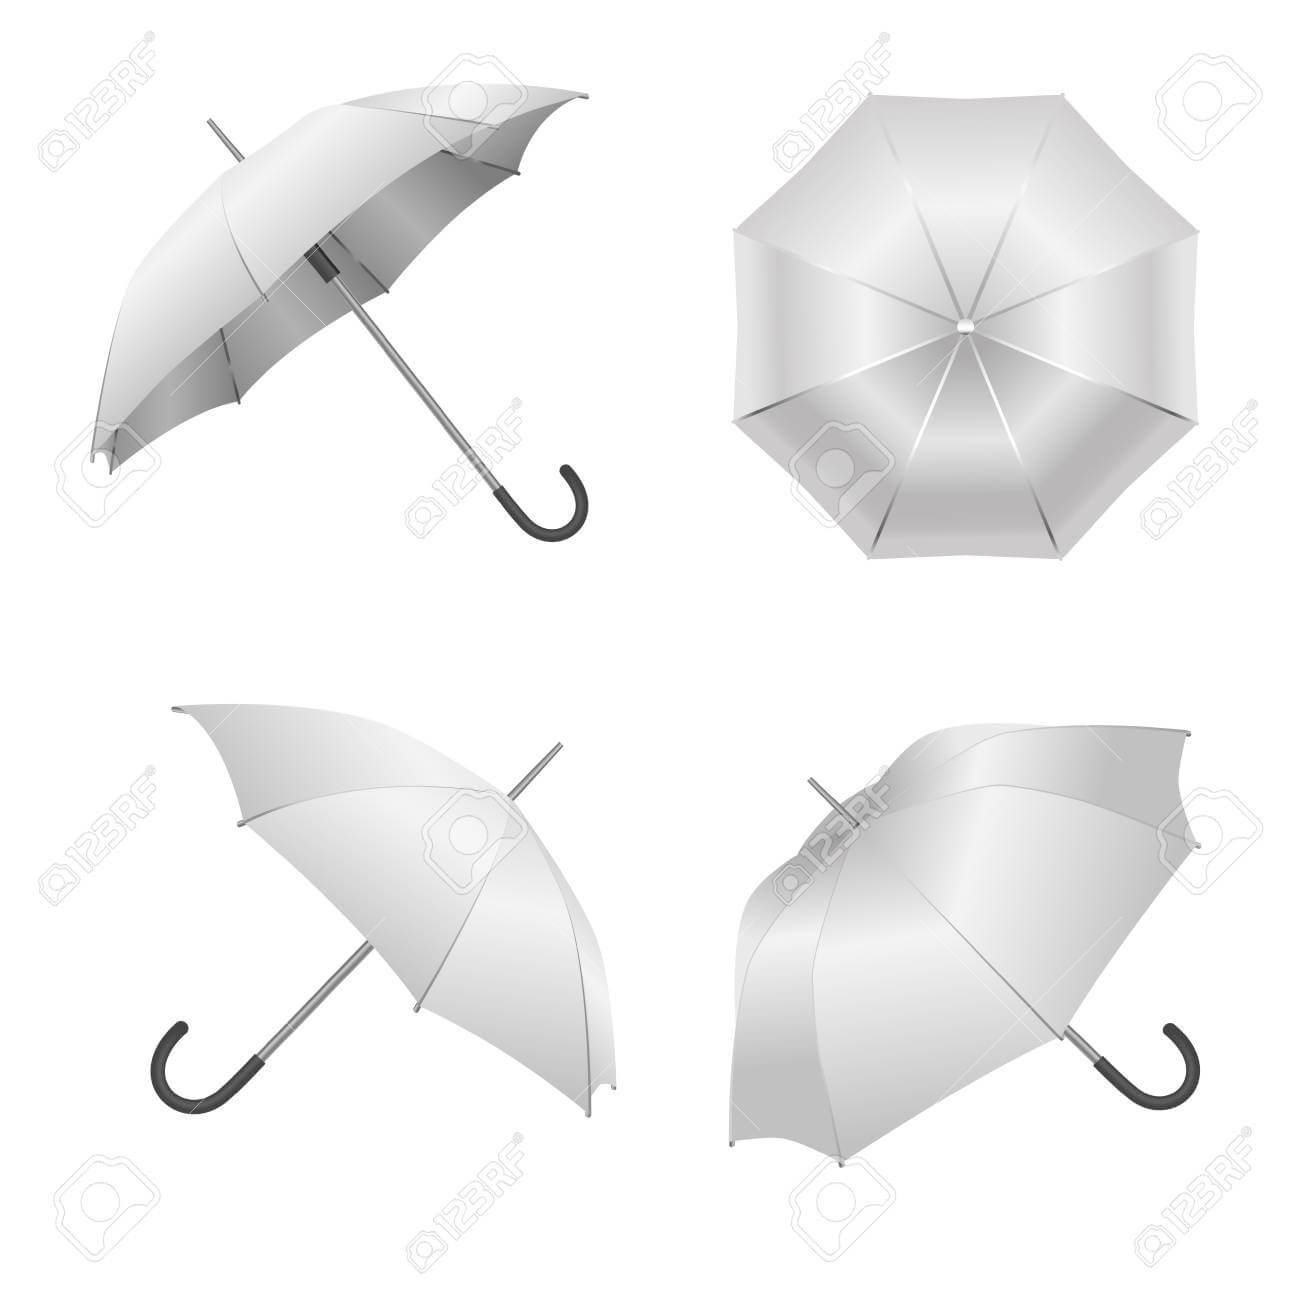 Realistic Detailed 3D White Blank Umbrella Template Mockup Set.. Intended For Blank Umbrella Template